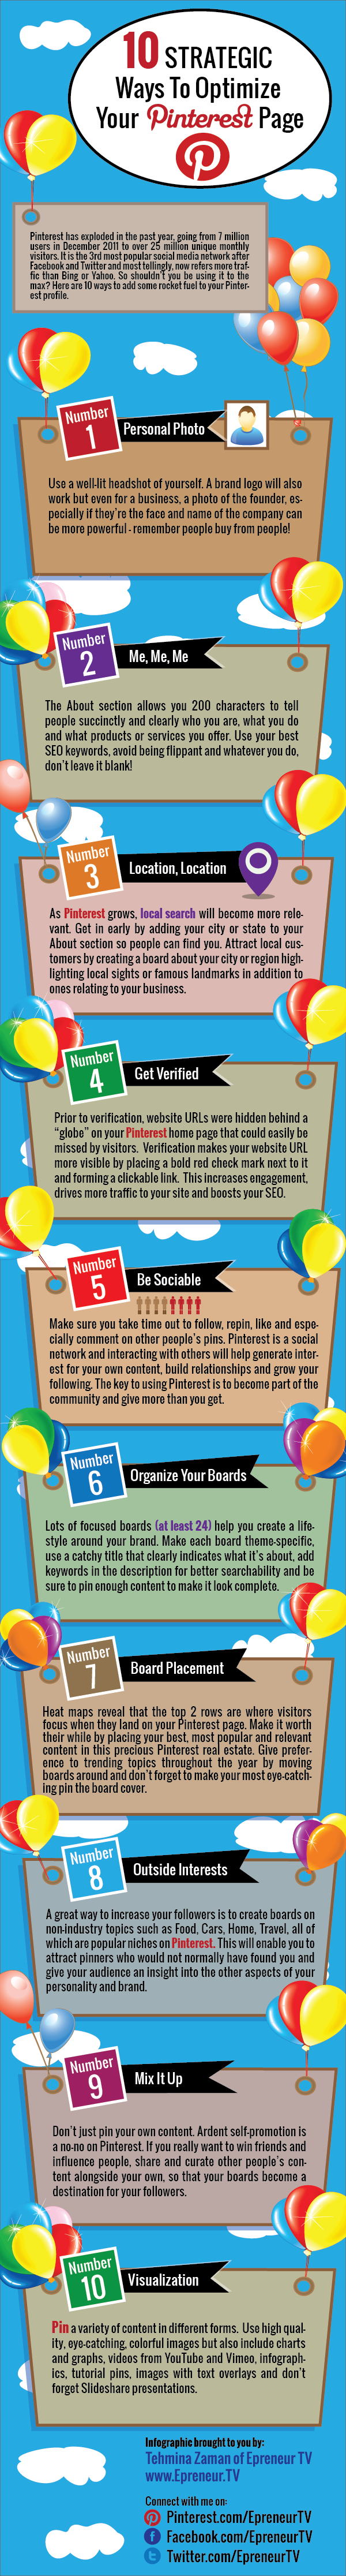 10 Strategic Ways to Optimize Your Pinterest Page – Infographic